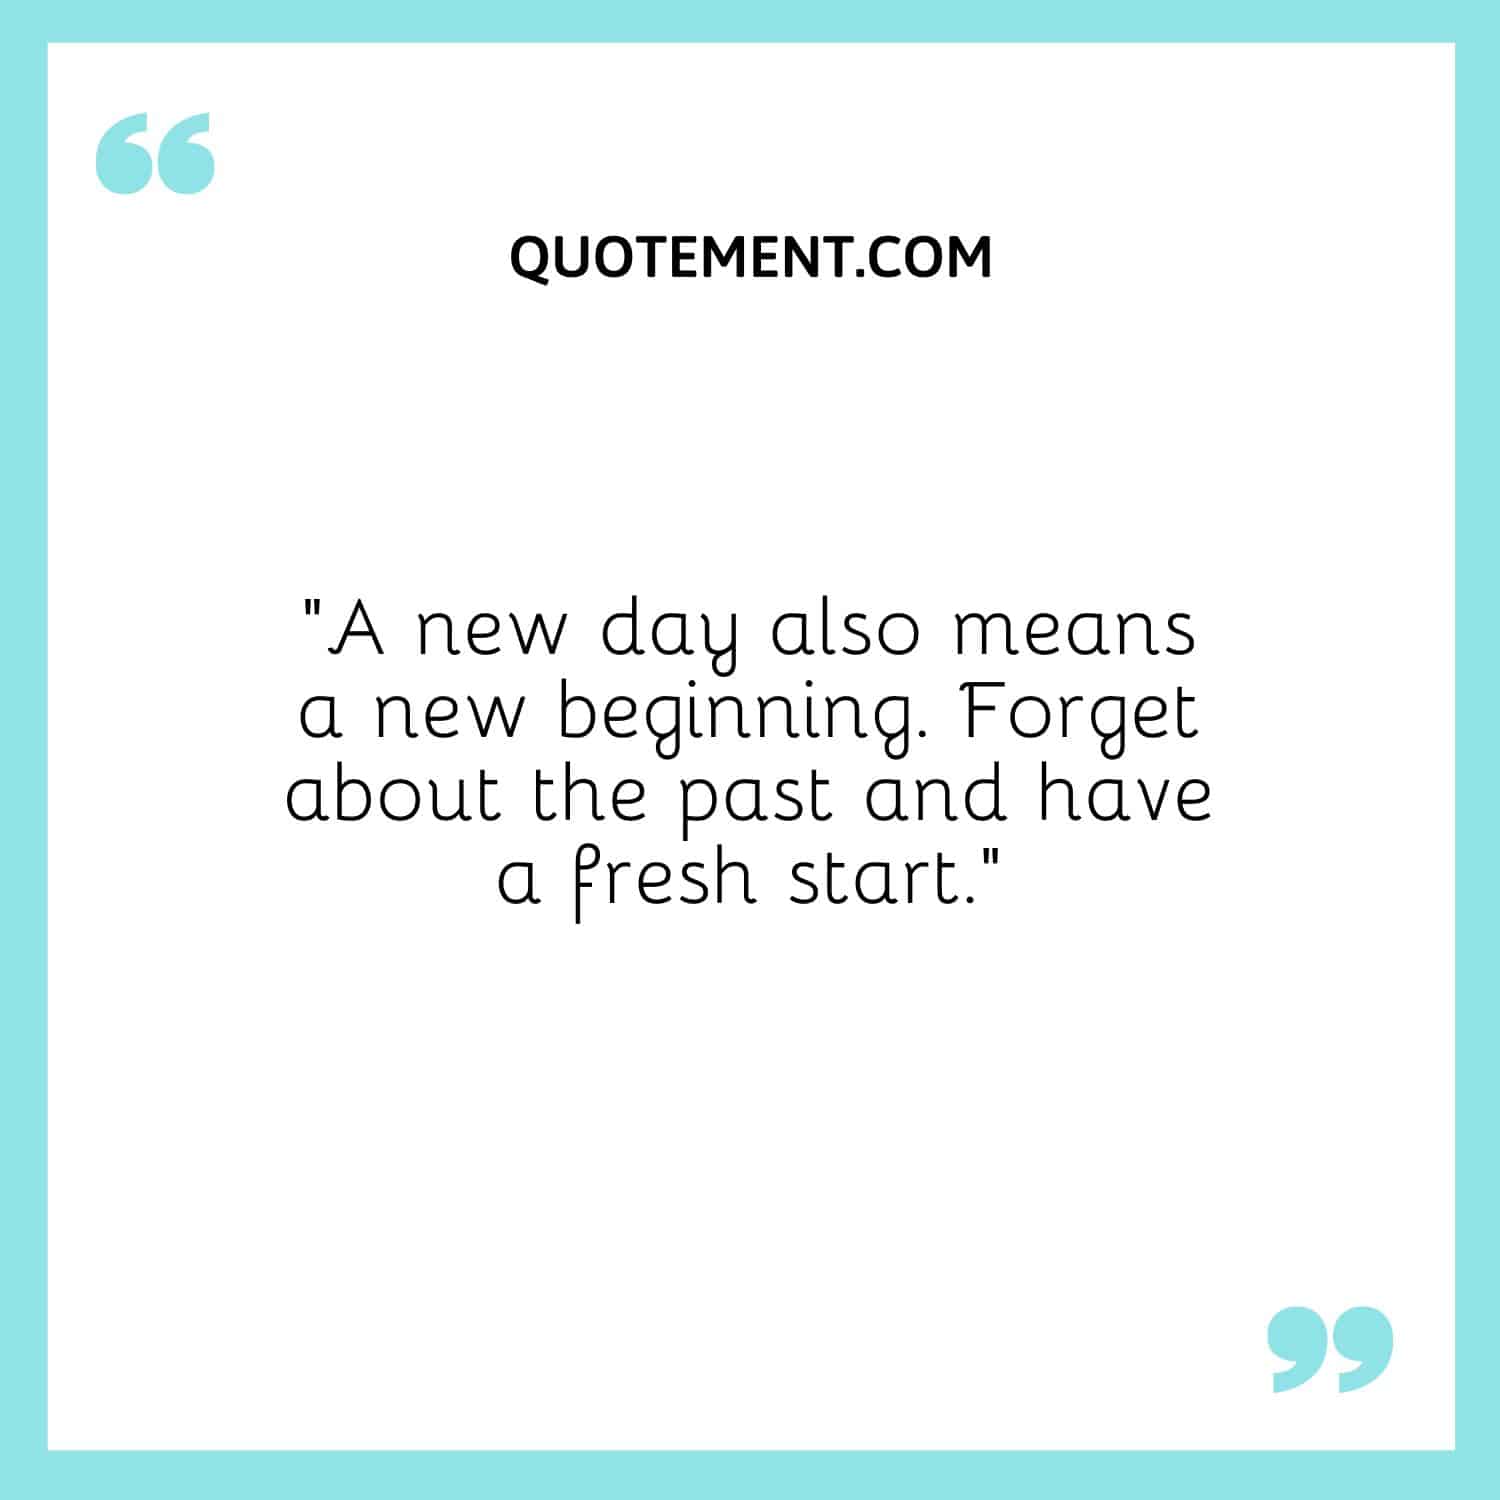 “A new day also means a new beginning. Forget about the past and have a fresh start.”